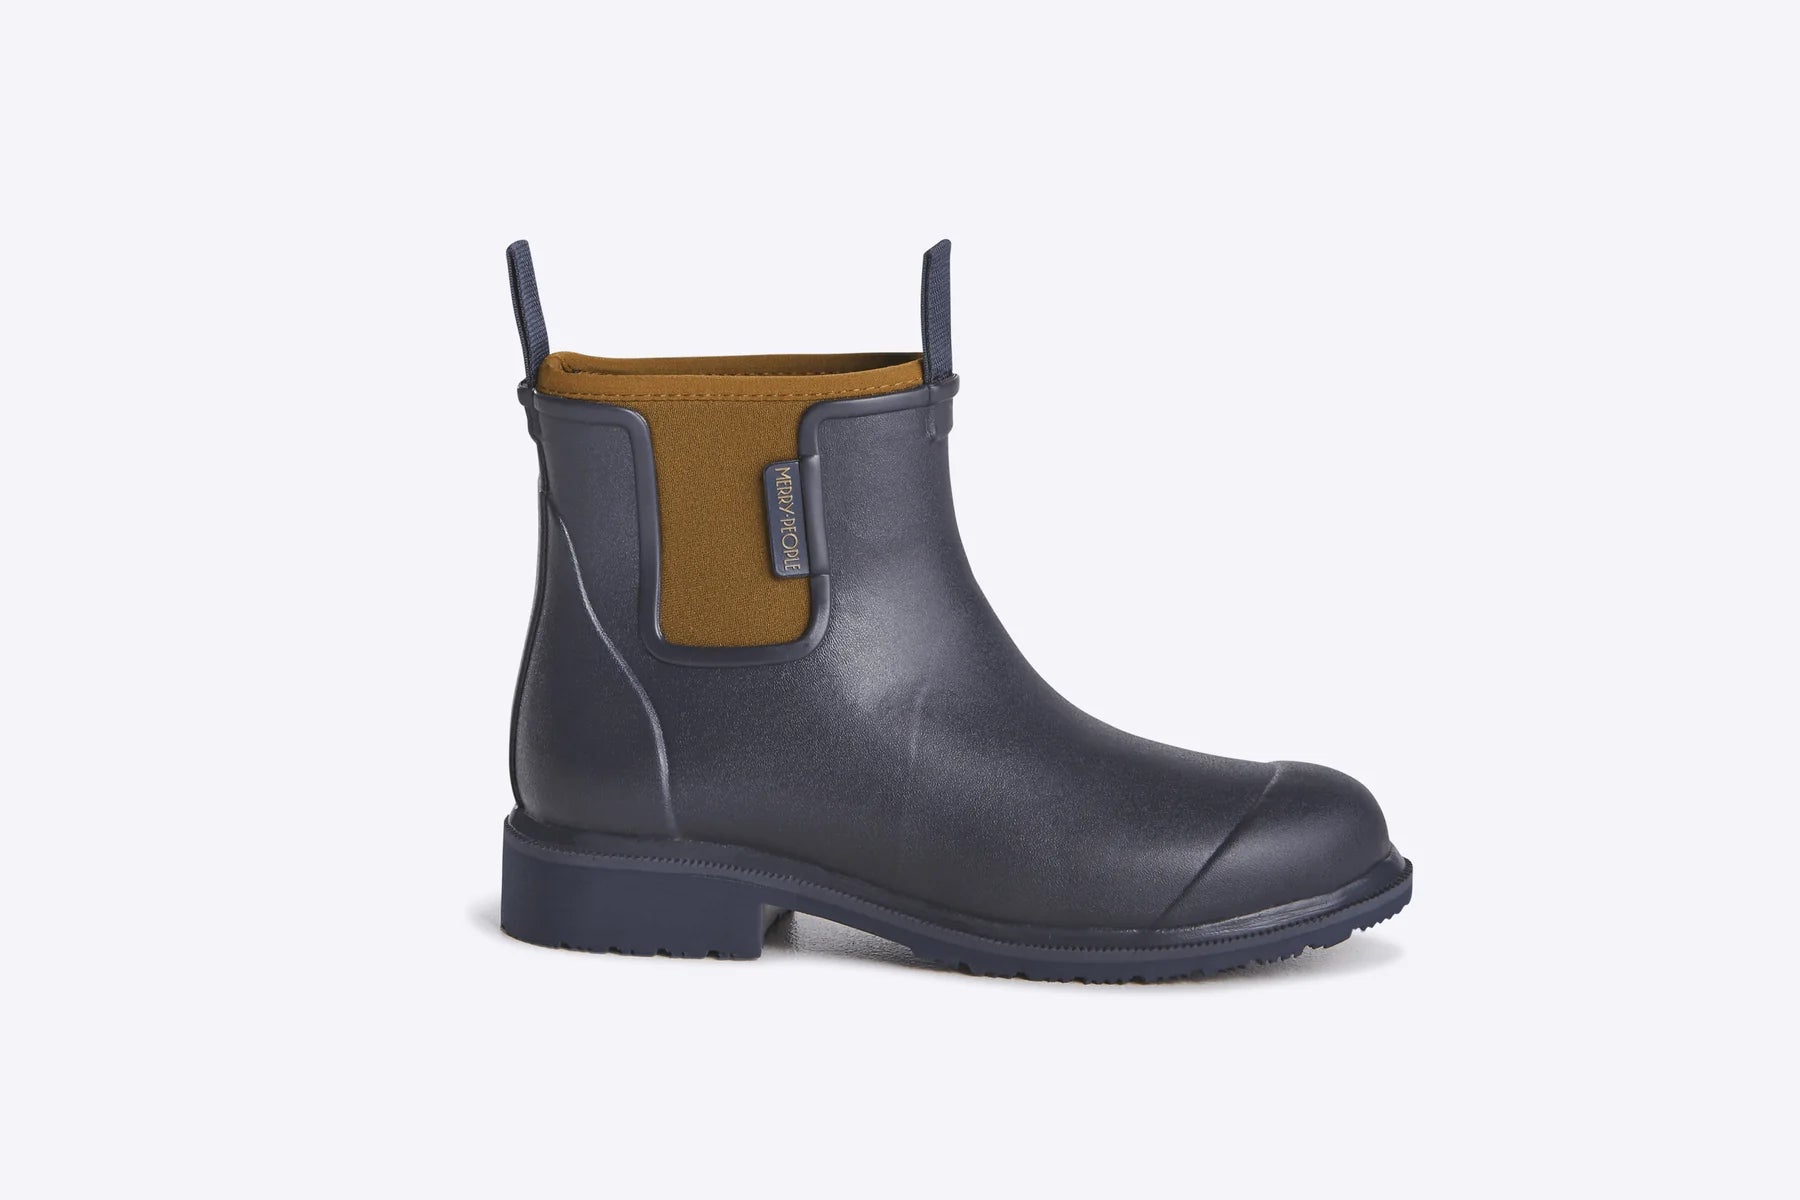 Bobbi Ankle Gumboot | Oxford Blue & Tan - Merry People - Alpineabode